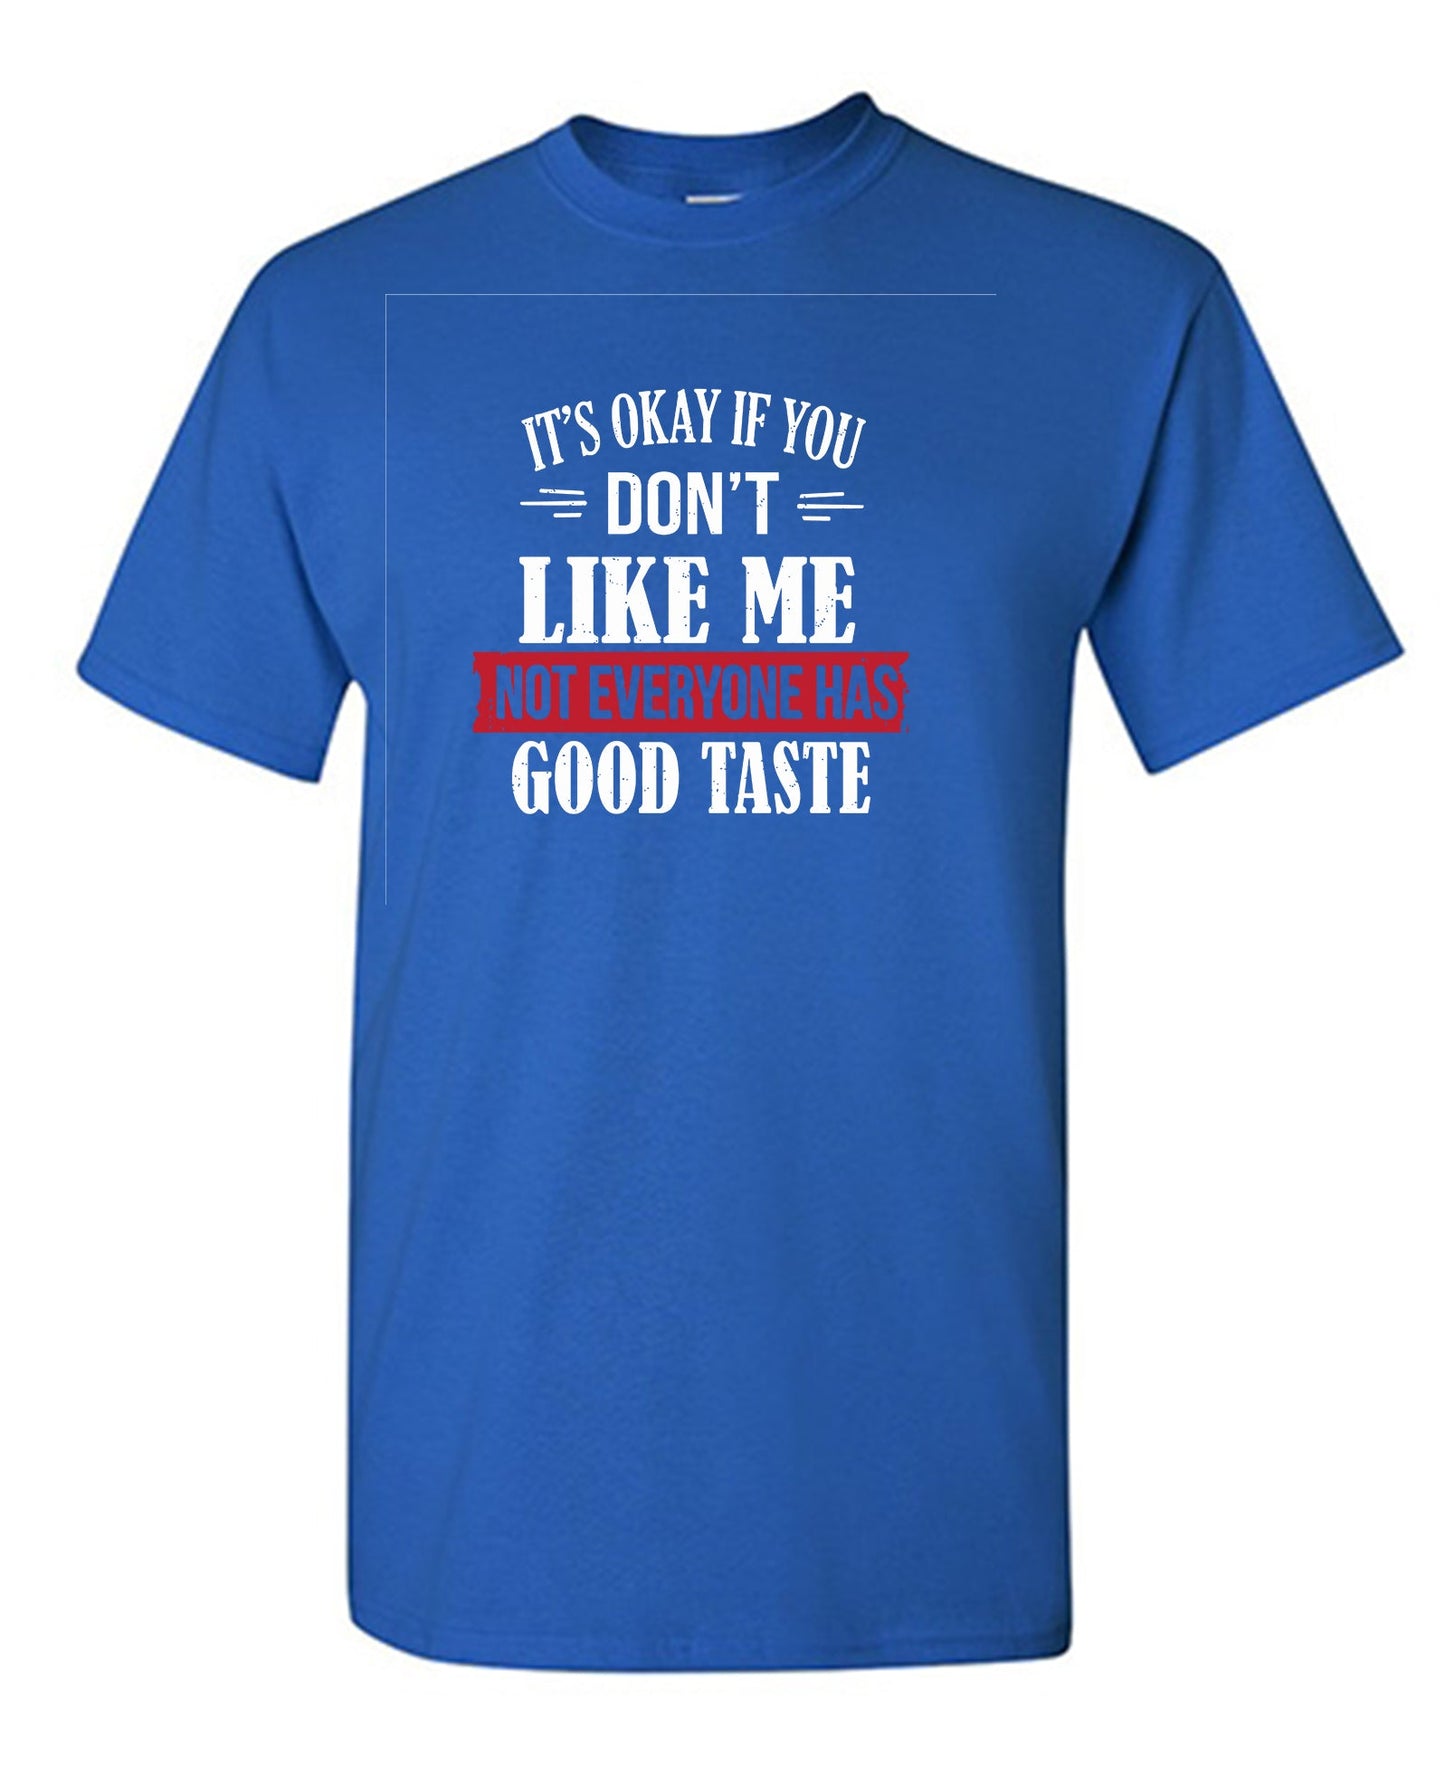 It's Okay If You Don't Like Me Not Everyone Has Good Taste - Funny T Shirts & Graphic Tees